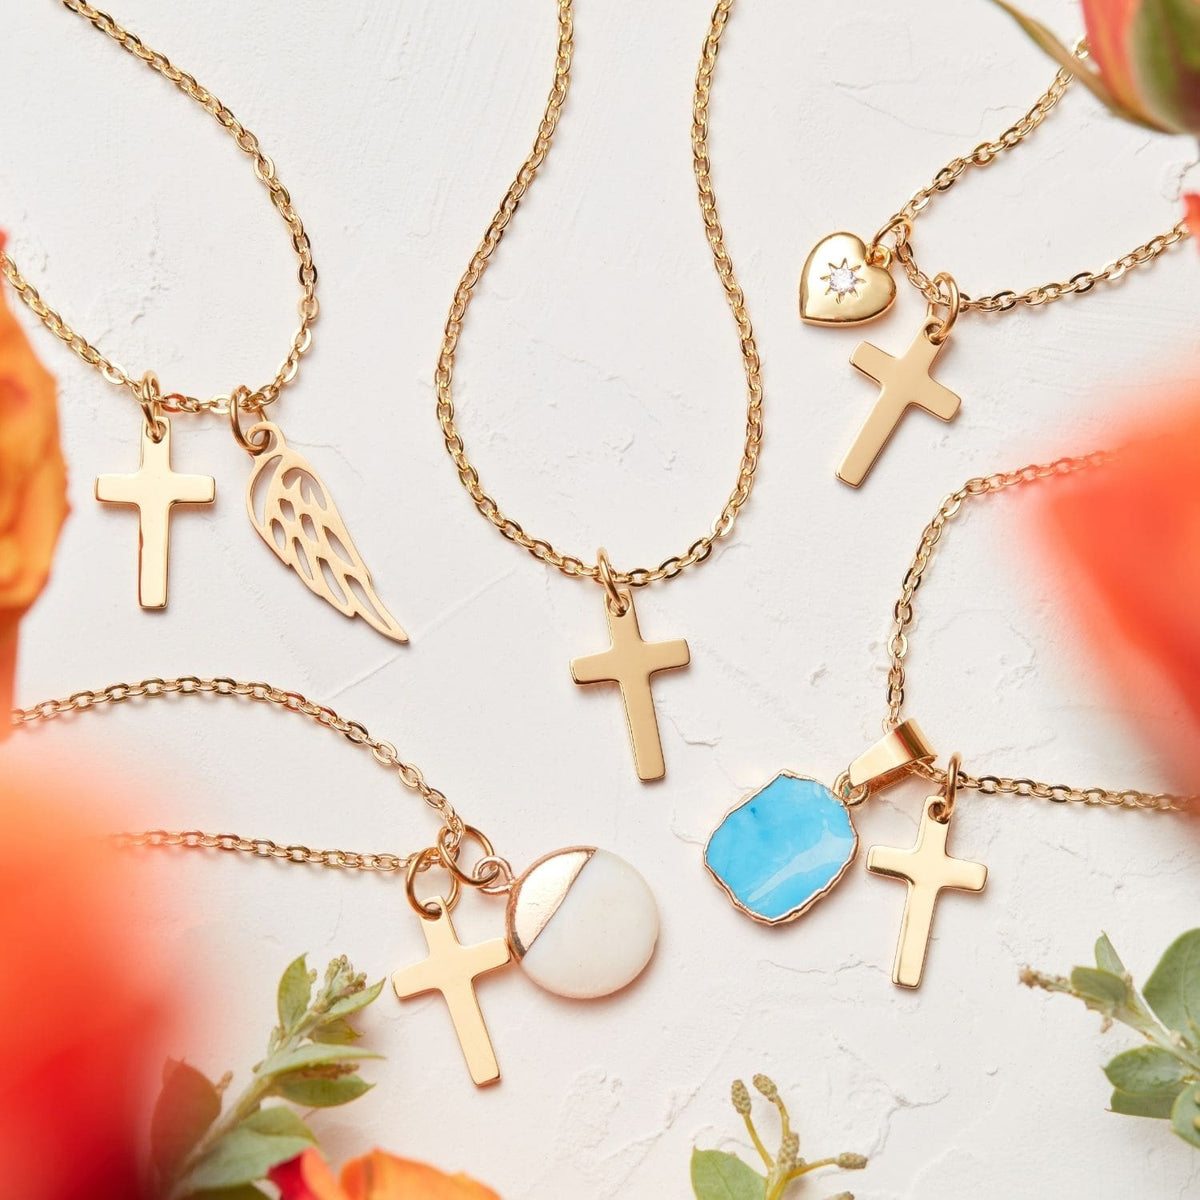 True Friendship | Grateful God Brought You Into My Life | Cross Necklace